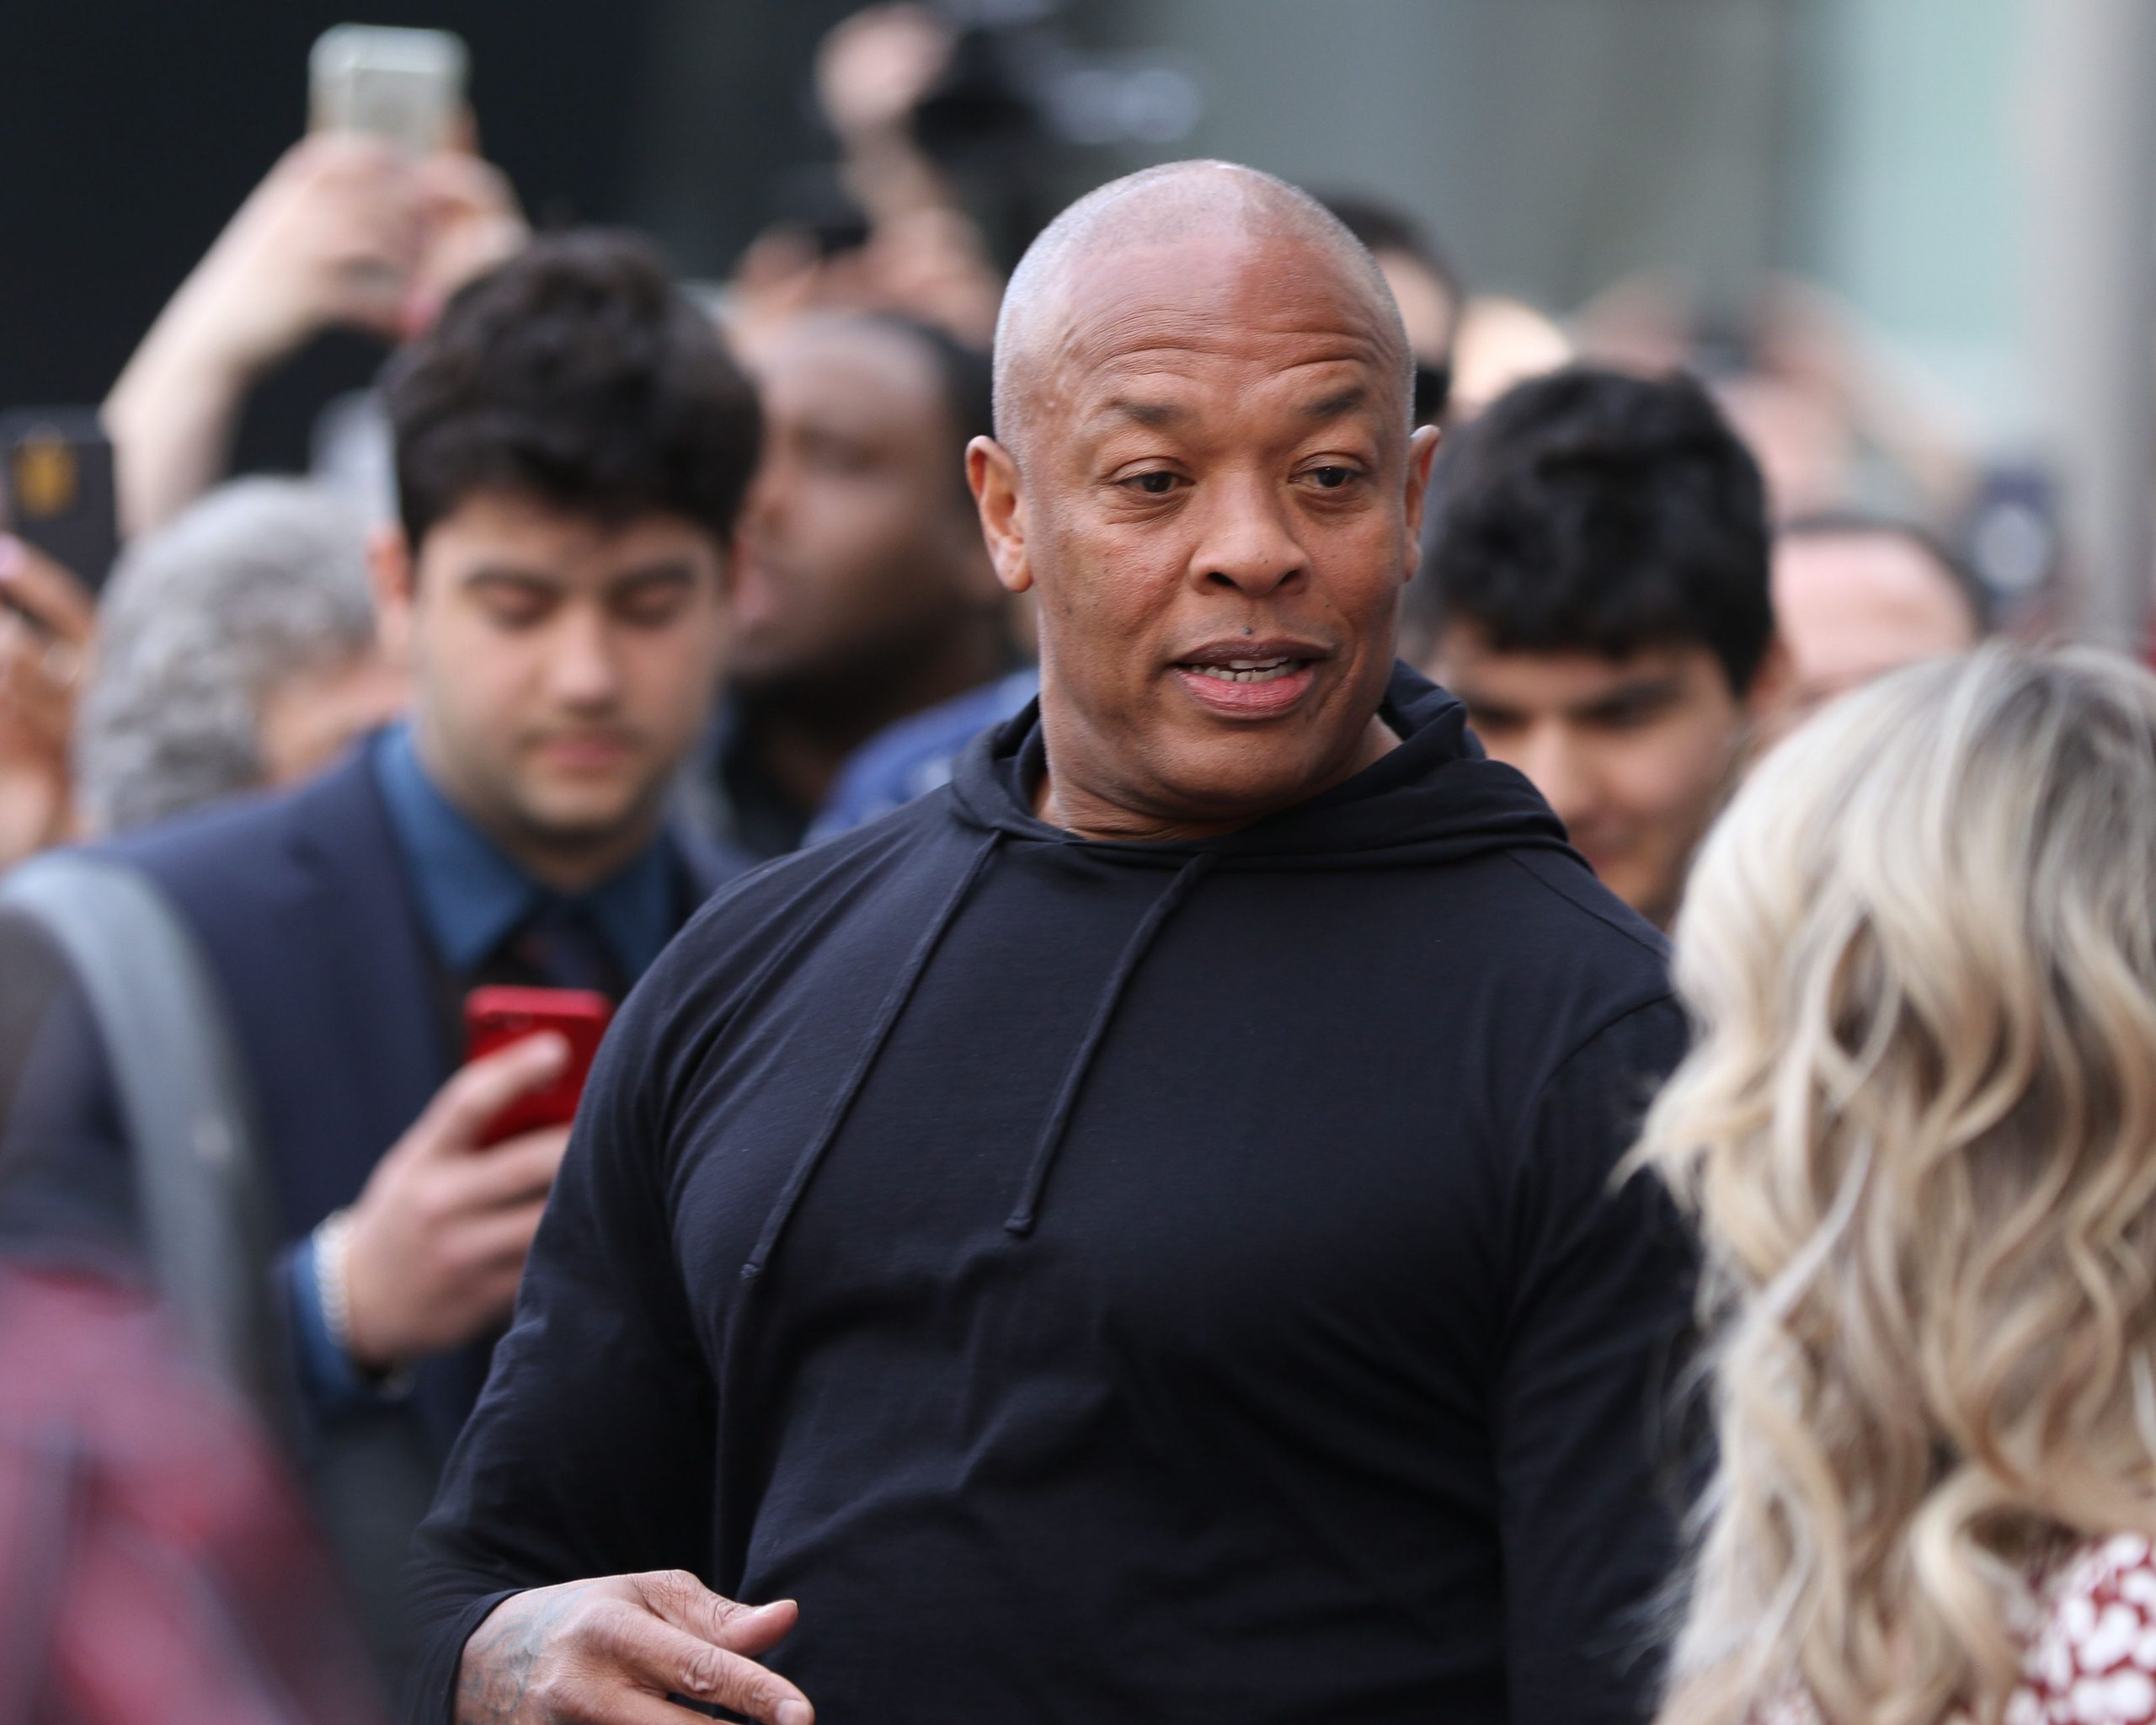 Rapper Dr Dre says he's 'doing great' in hospital after reported aneurysm